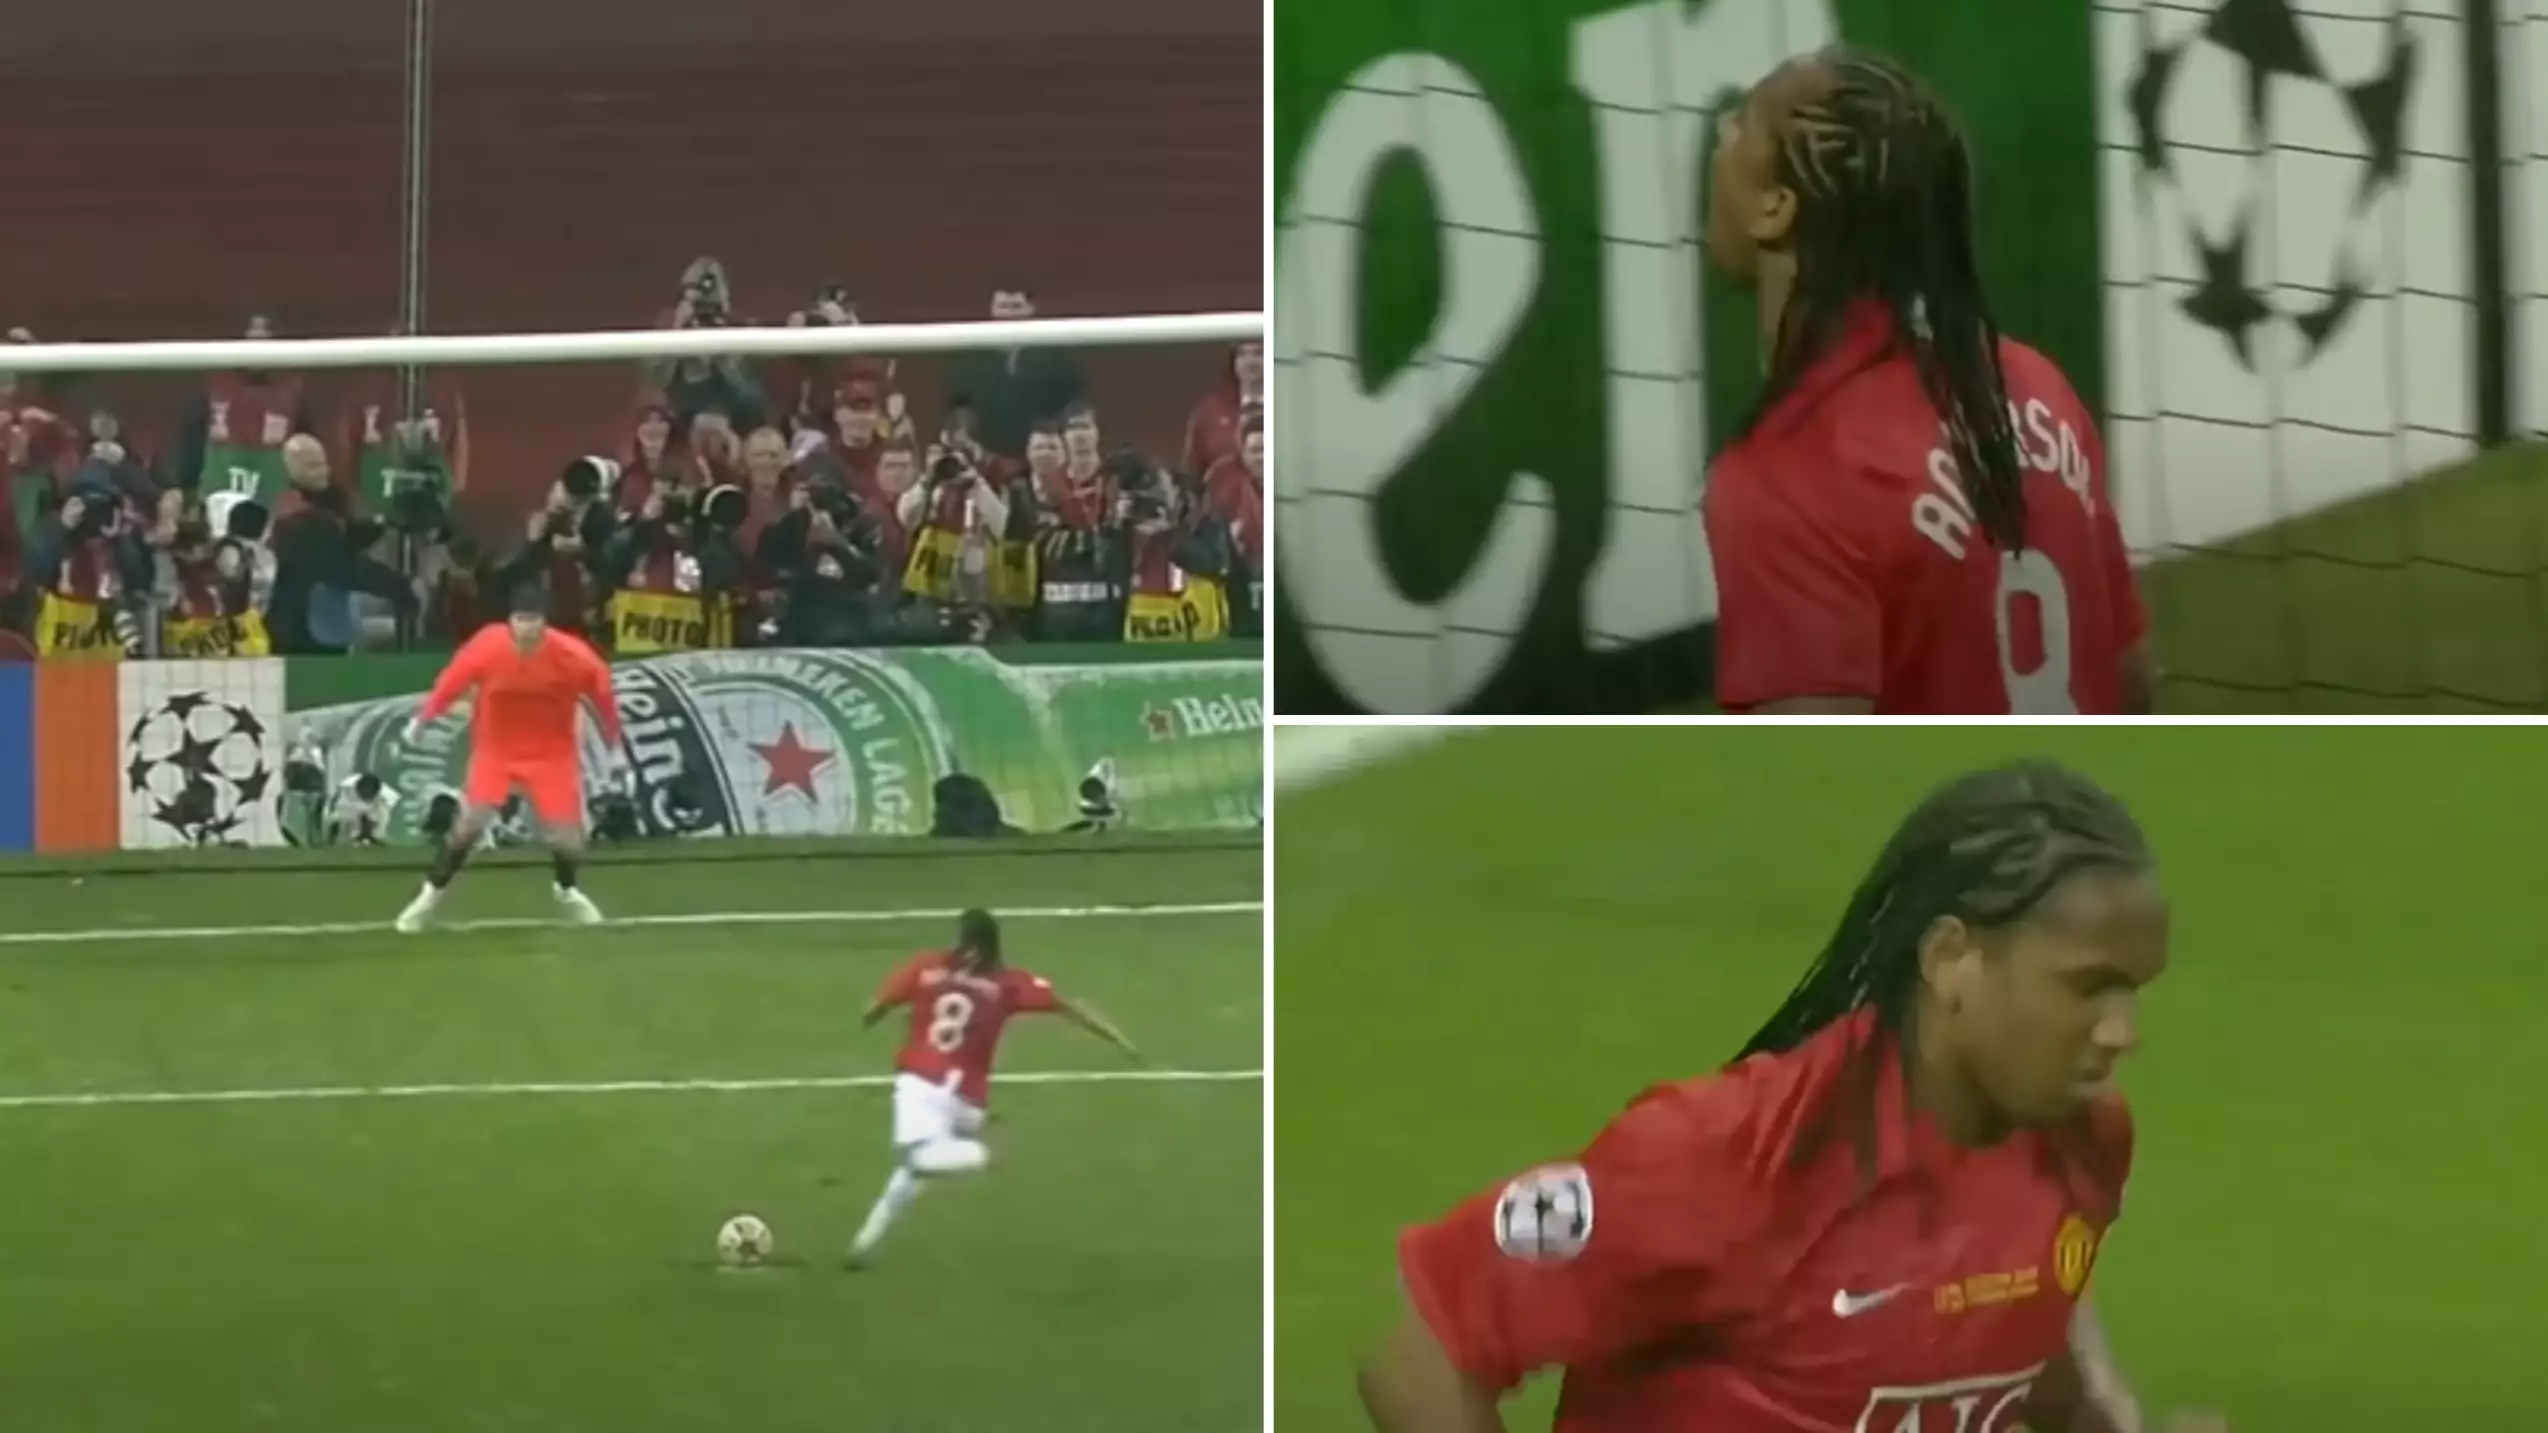 Anderson's Outrageous Penalty With His Only Touch In The Champions League Final Has Resurfaced